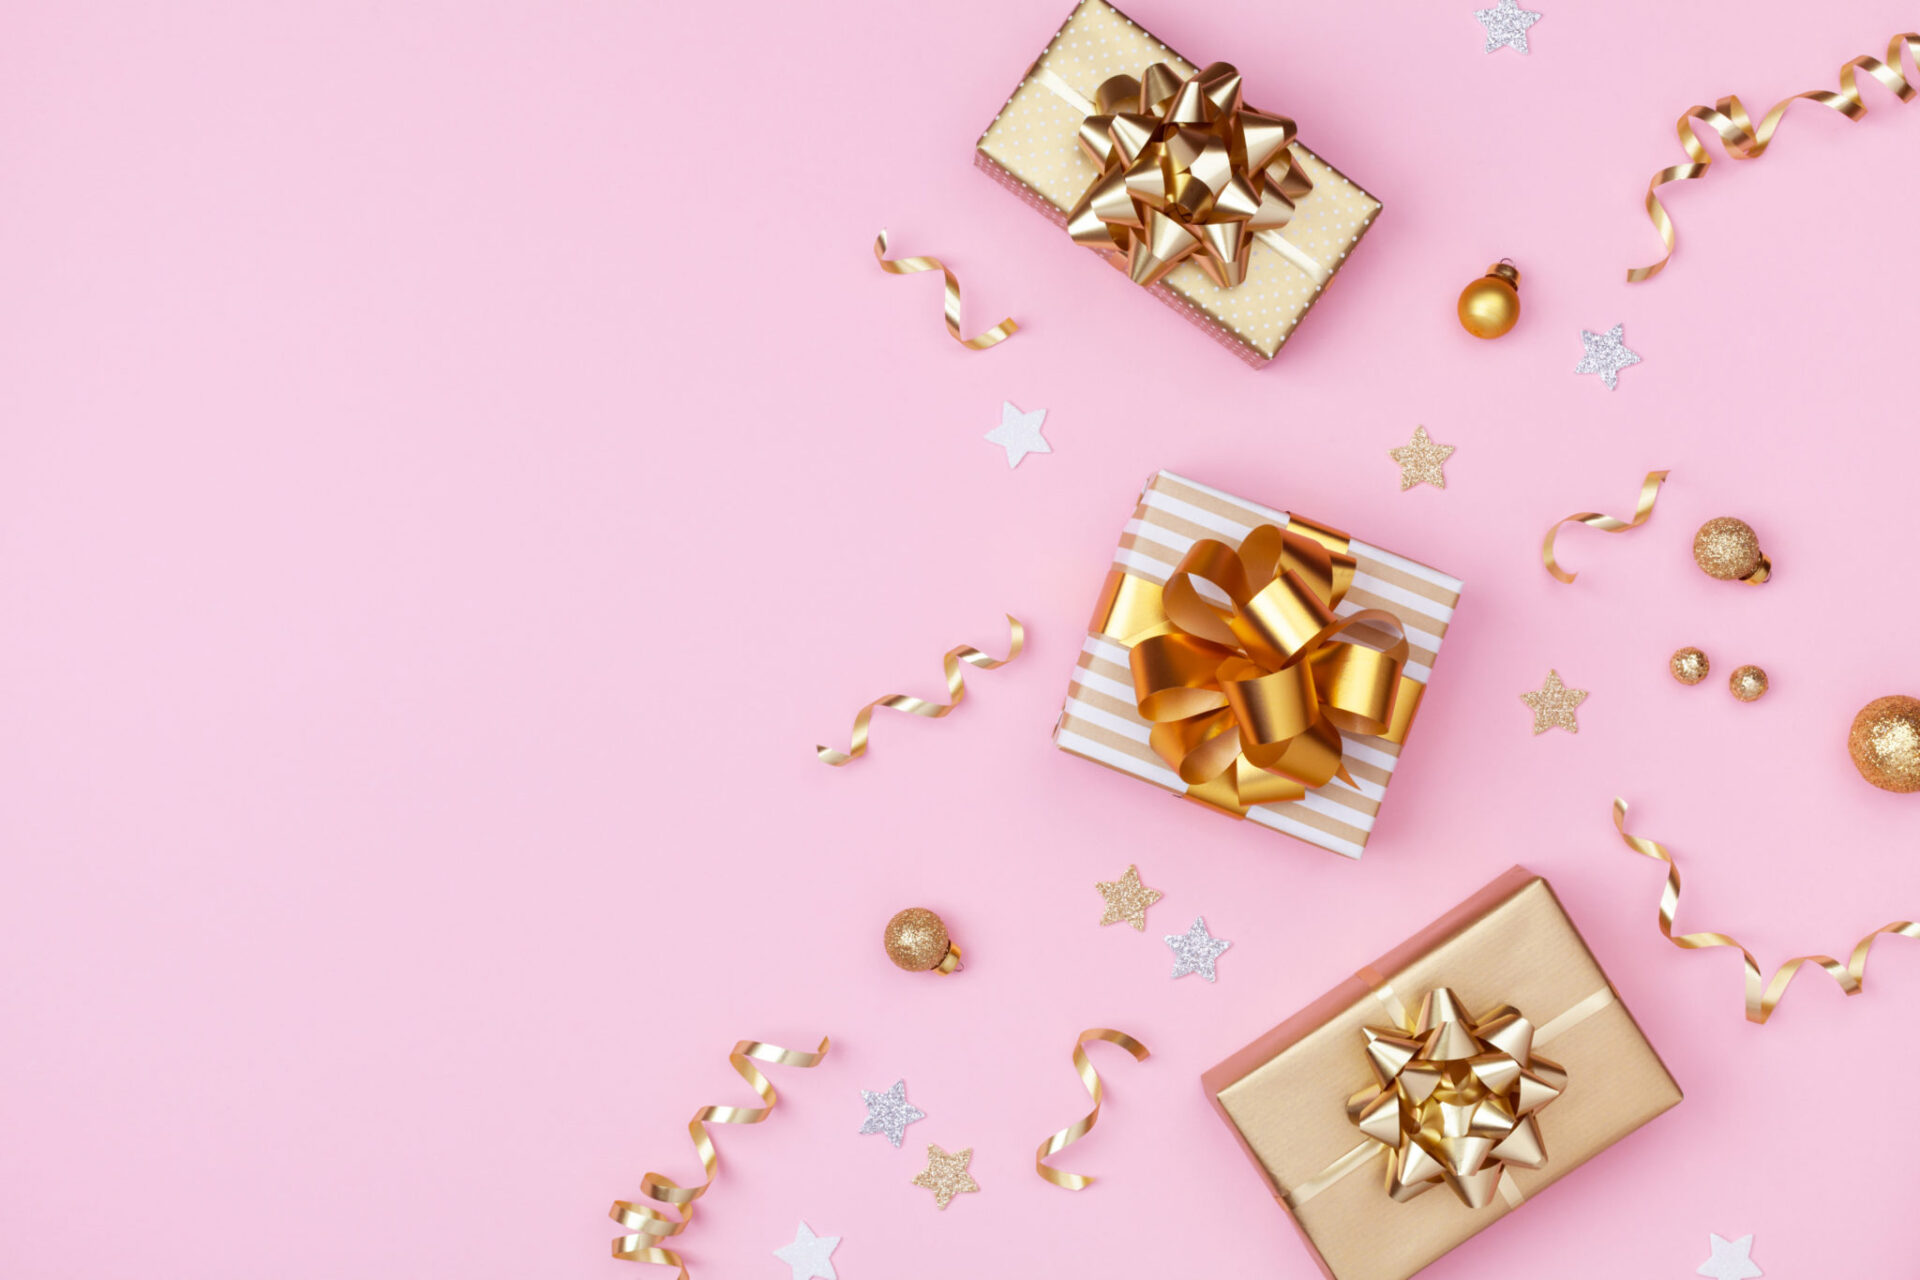 Golden gift or present boxes and Christmas decorations on pink background top view. Flat lay.